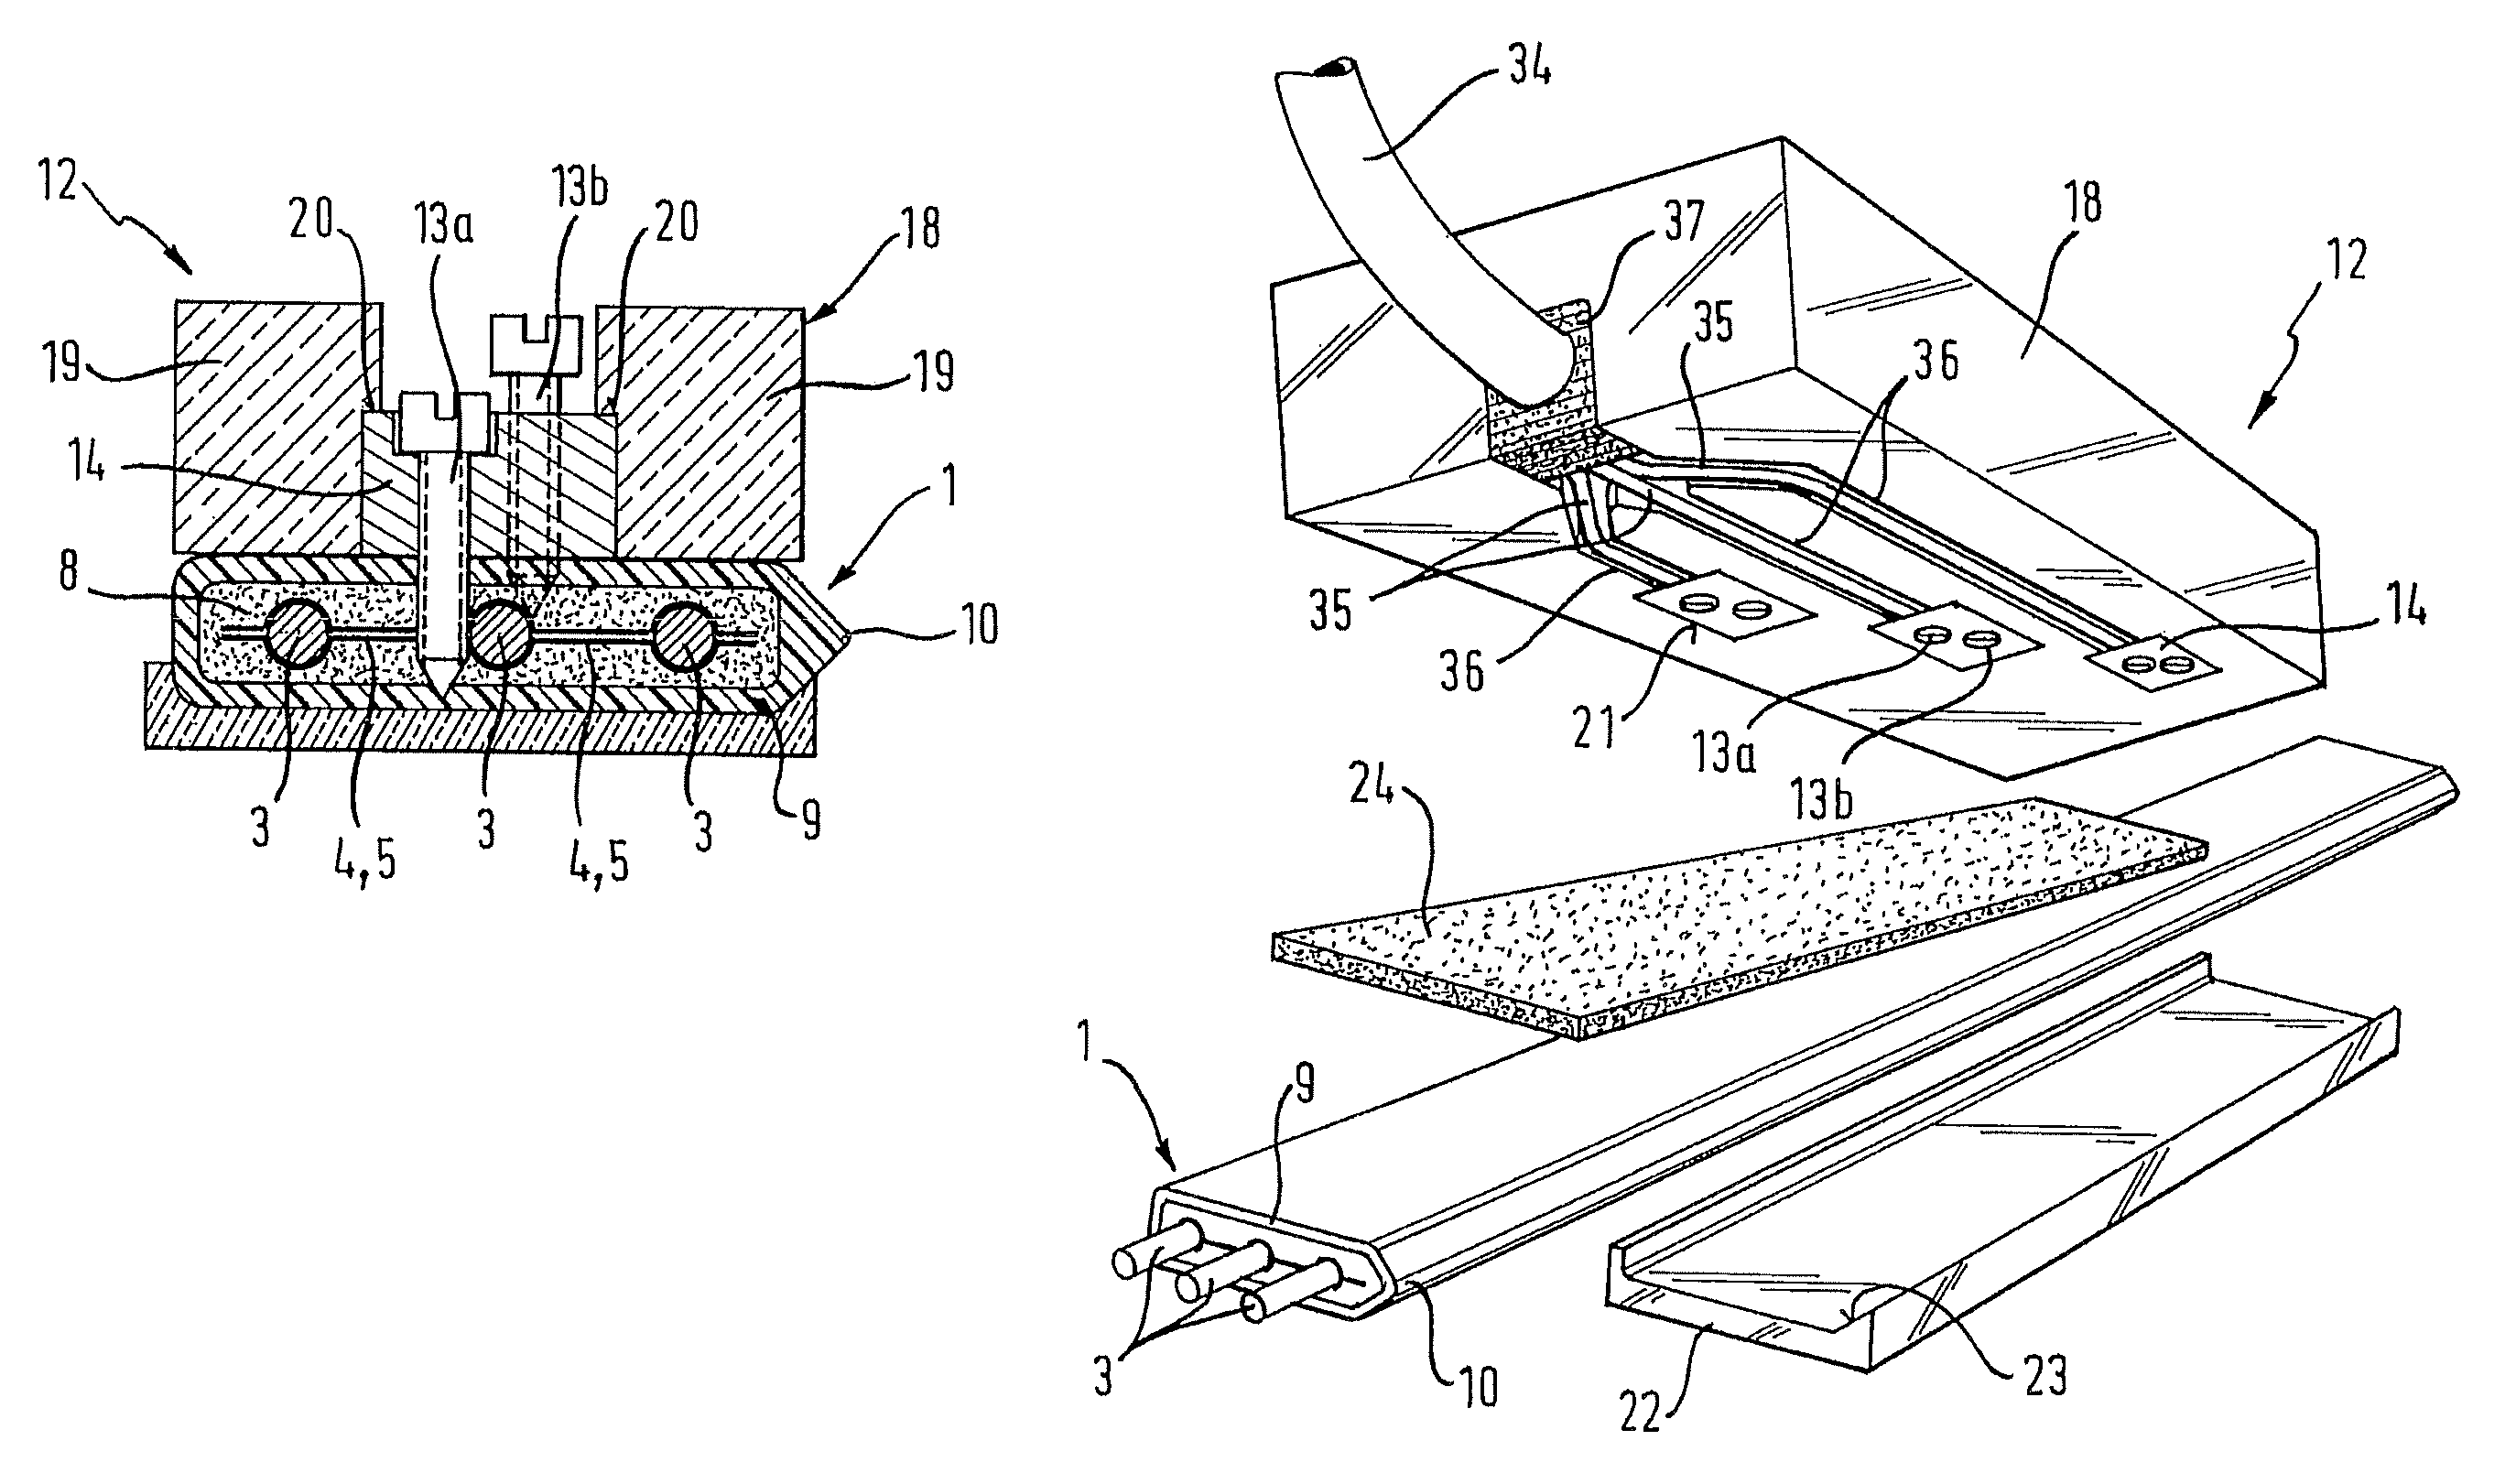 Connection device and installation kit for electrical installation with circuit integrity in case of fire